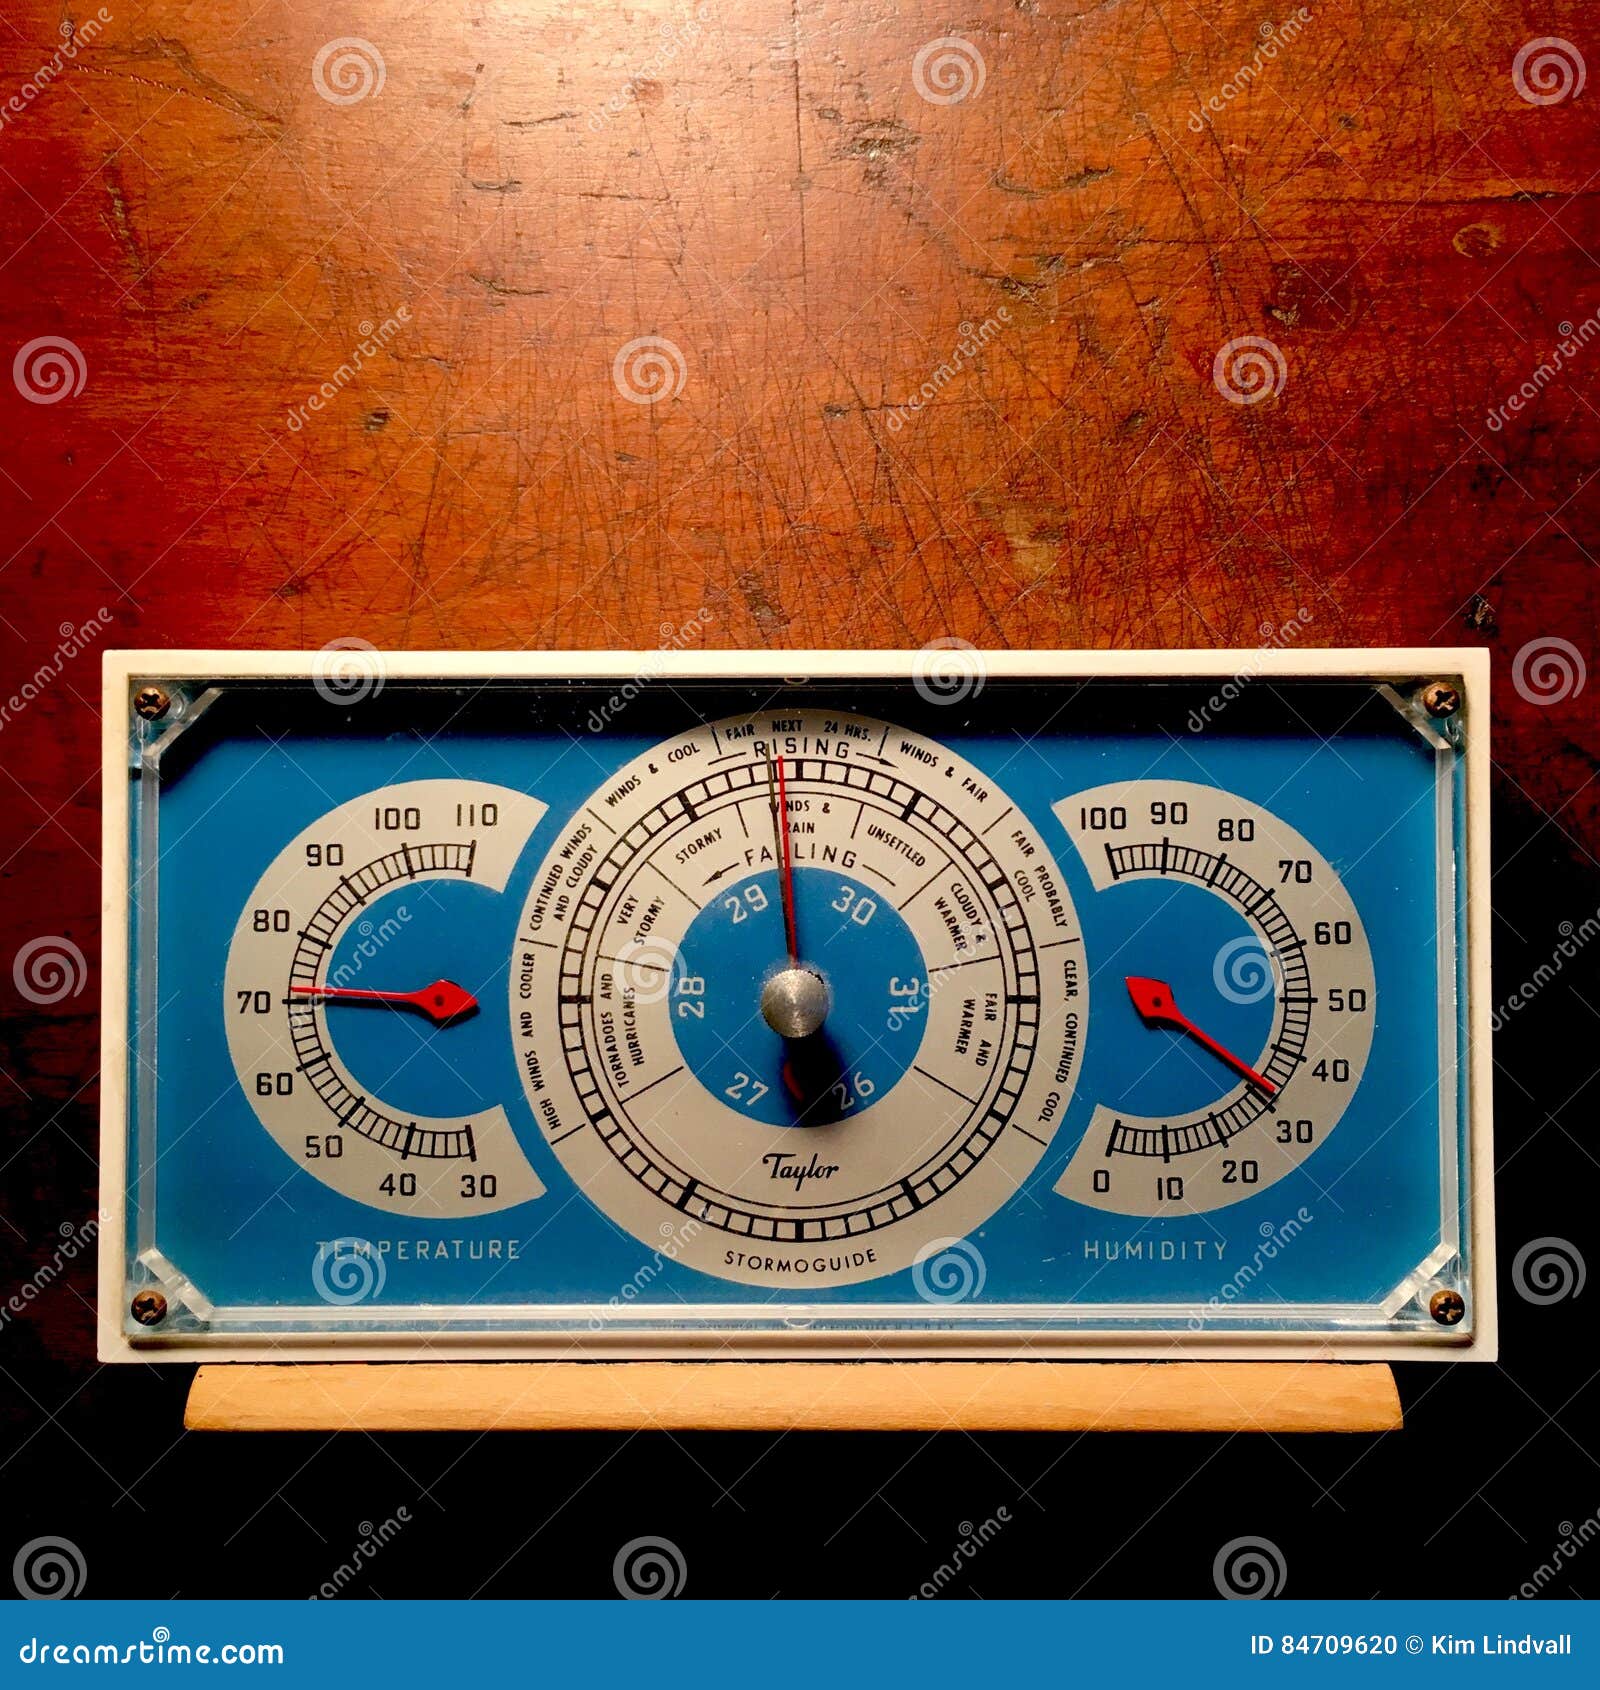 https://thumbs.dreamstime.com/z/vintage-barometer-thermometer-hygrometer-shown-against-weathered-wood-background-retro-has-space-text-84709620.jpg